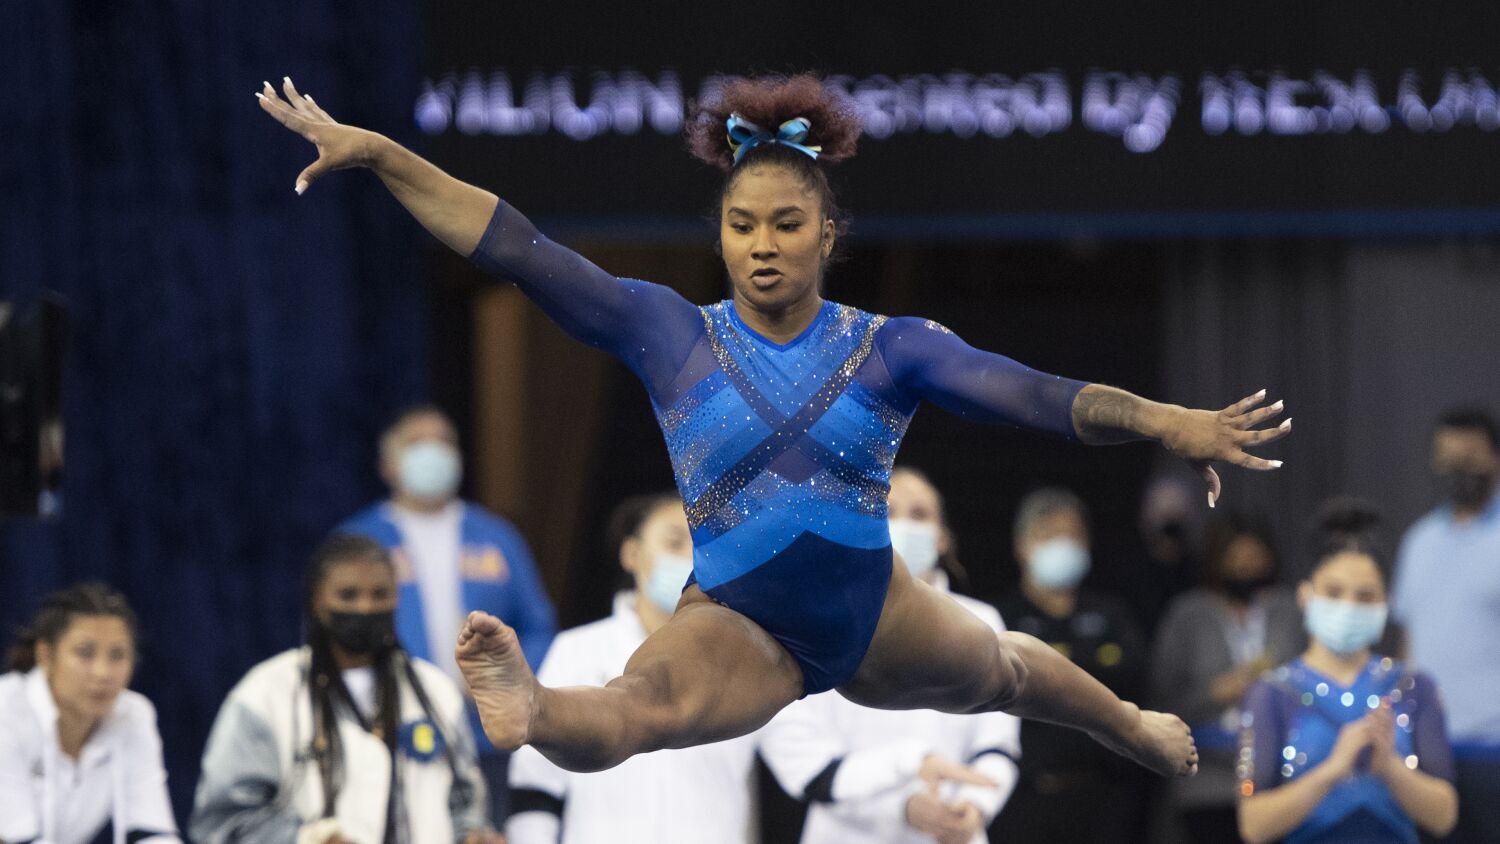 UCLA gymnastics returns to NCAA conversation with best opening score since 2005